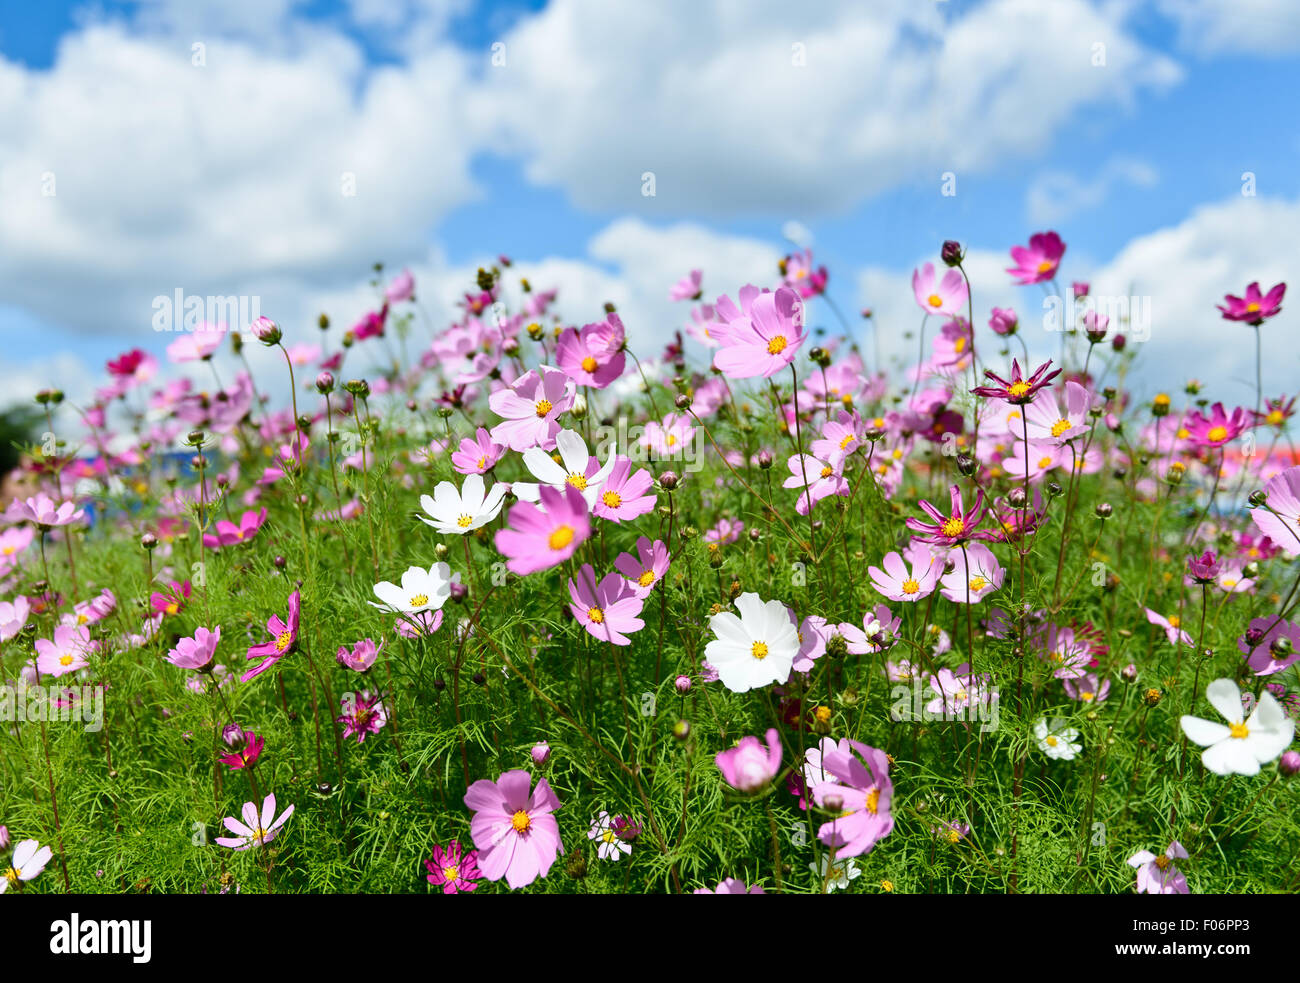 Summer field with daisies on blue sky Stock Photo